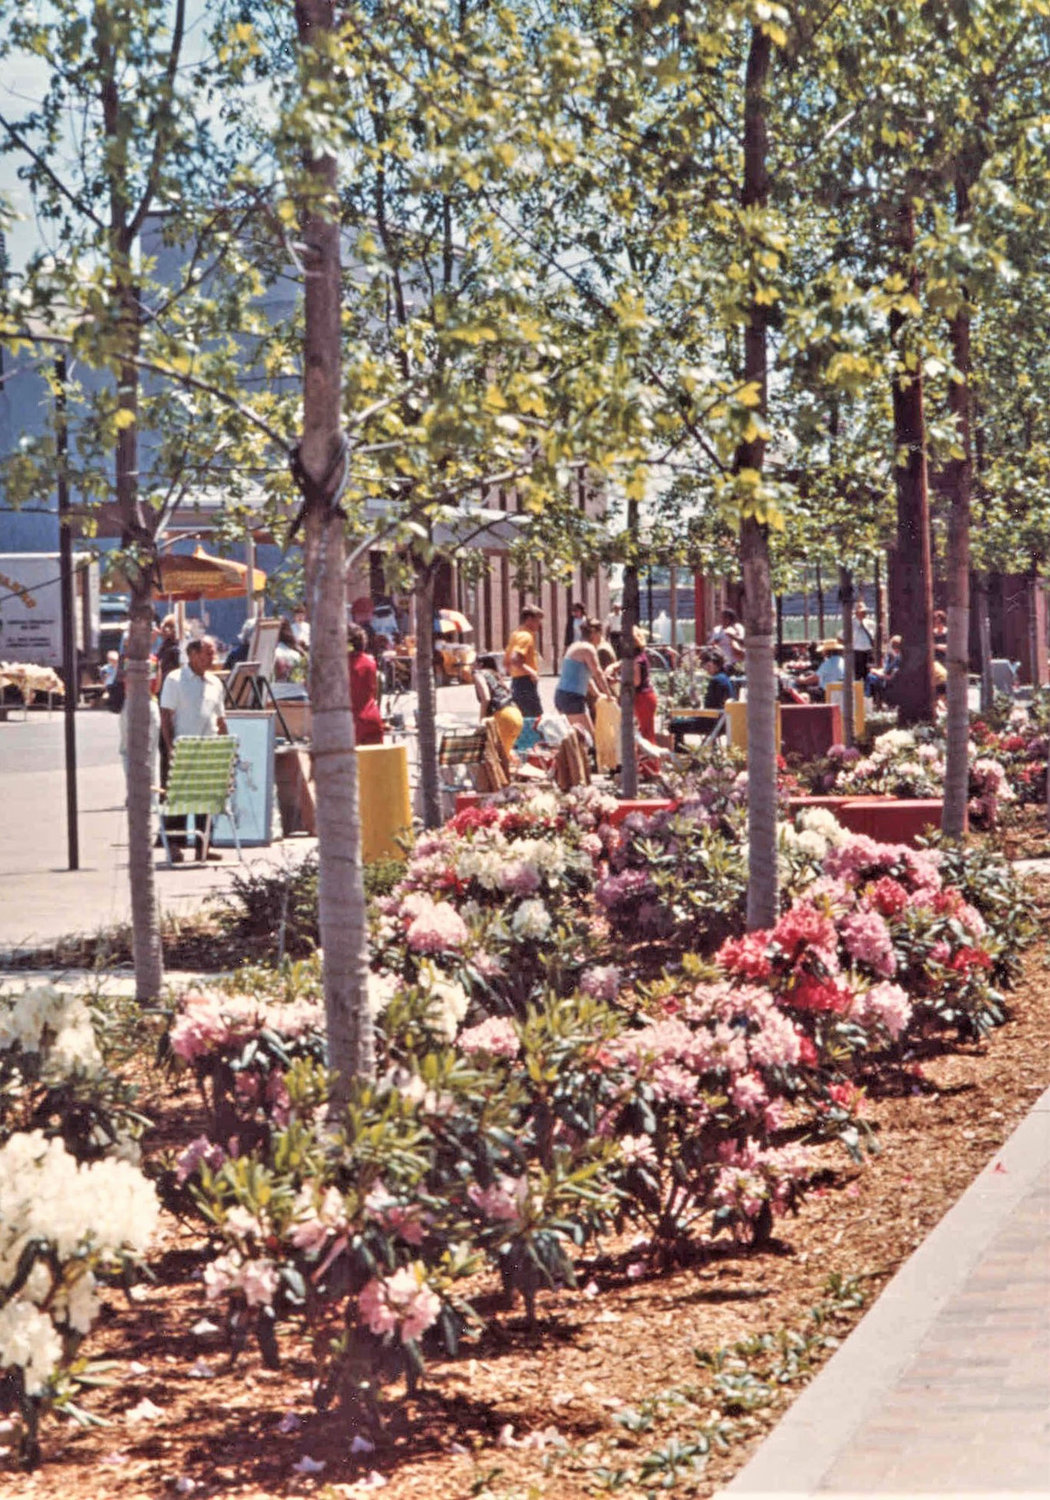 Flower bushes and trees line the former Pedestrian Mall behind Rome City Hall.